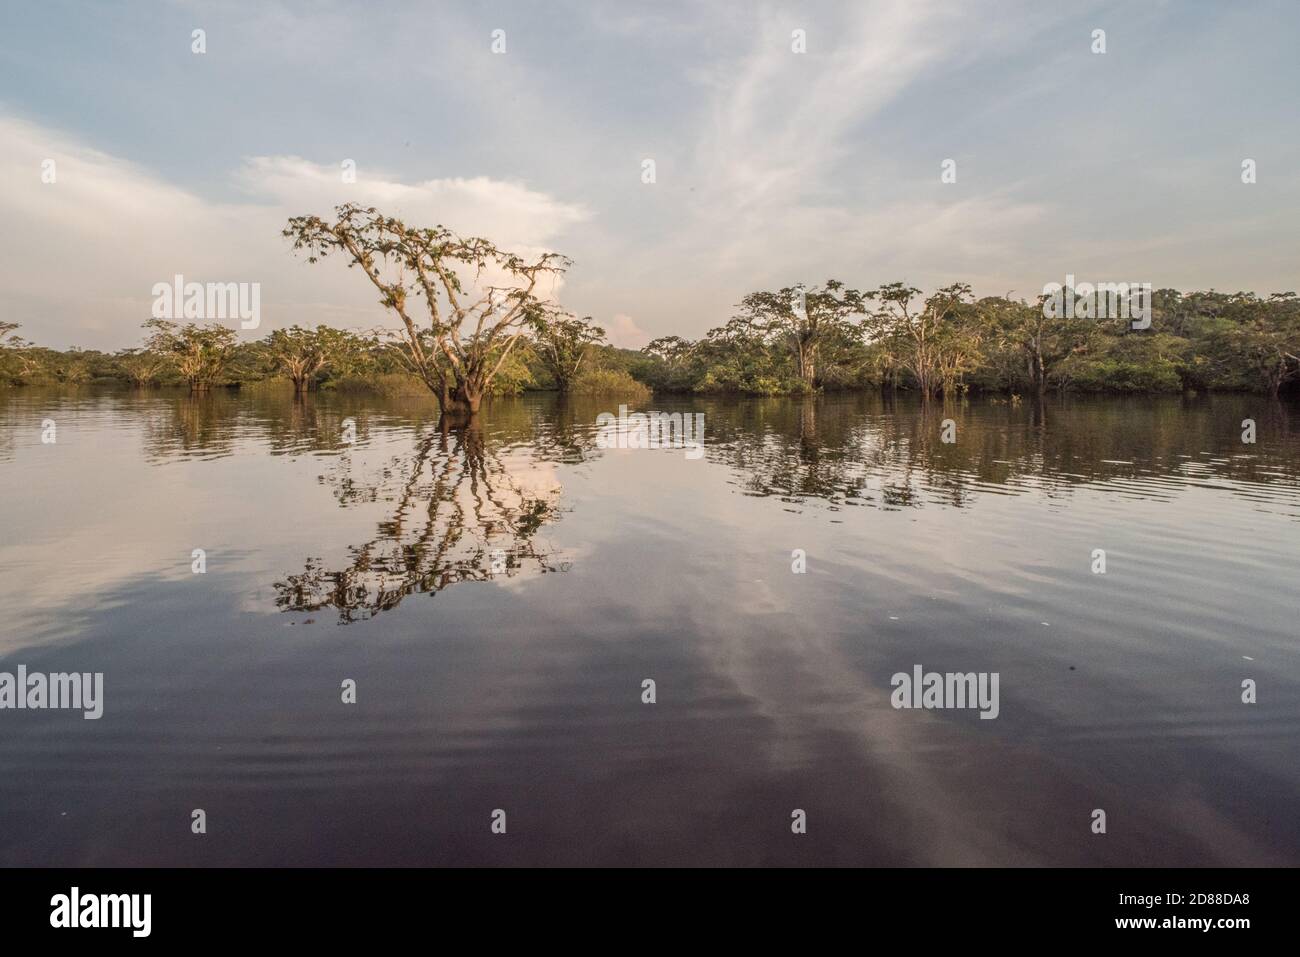 The flooded amazonian forest of Cuyabeno wildlife reserve in Ecuador. Stock Photo